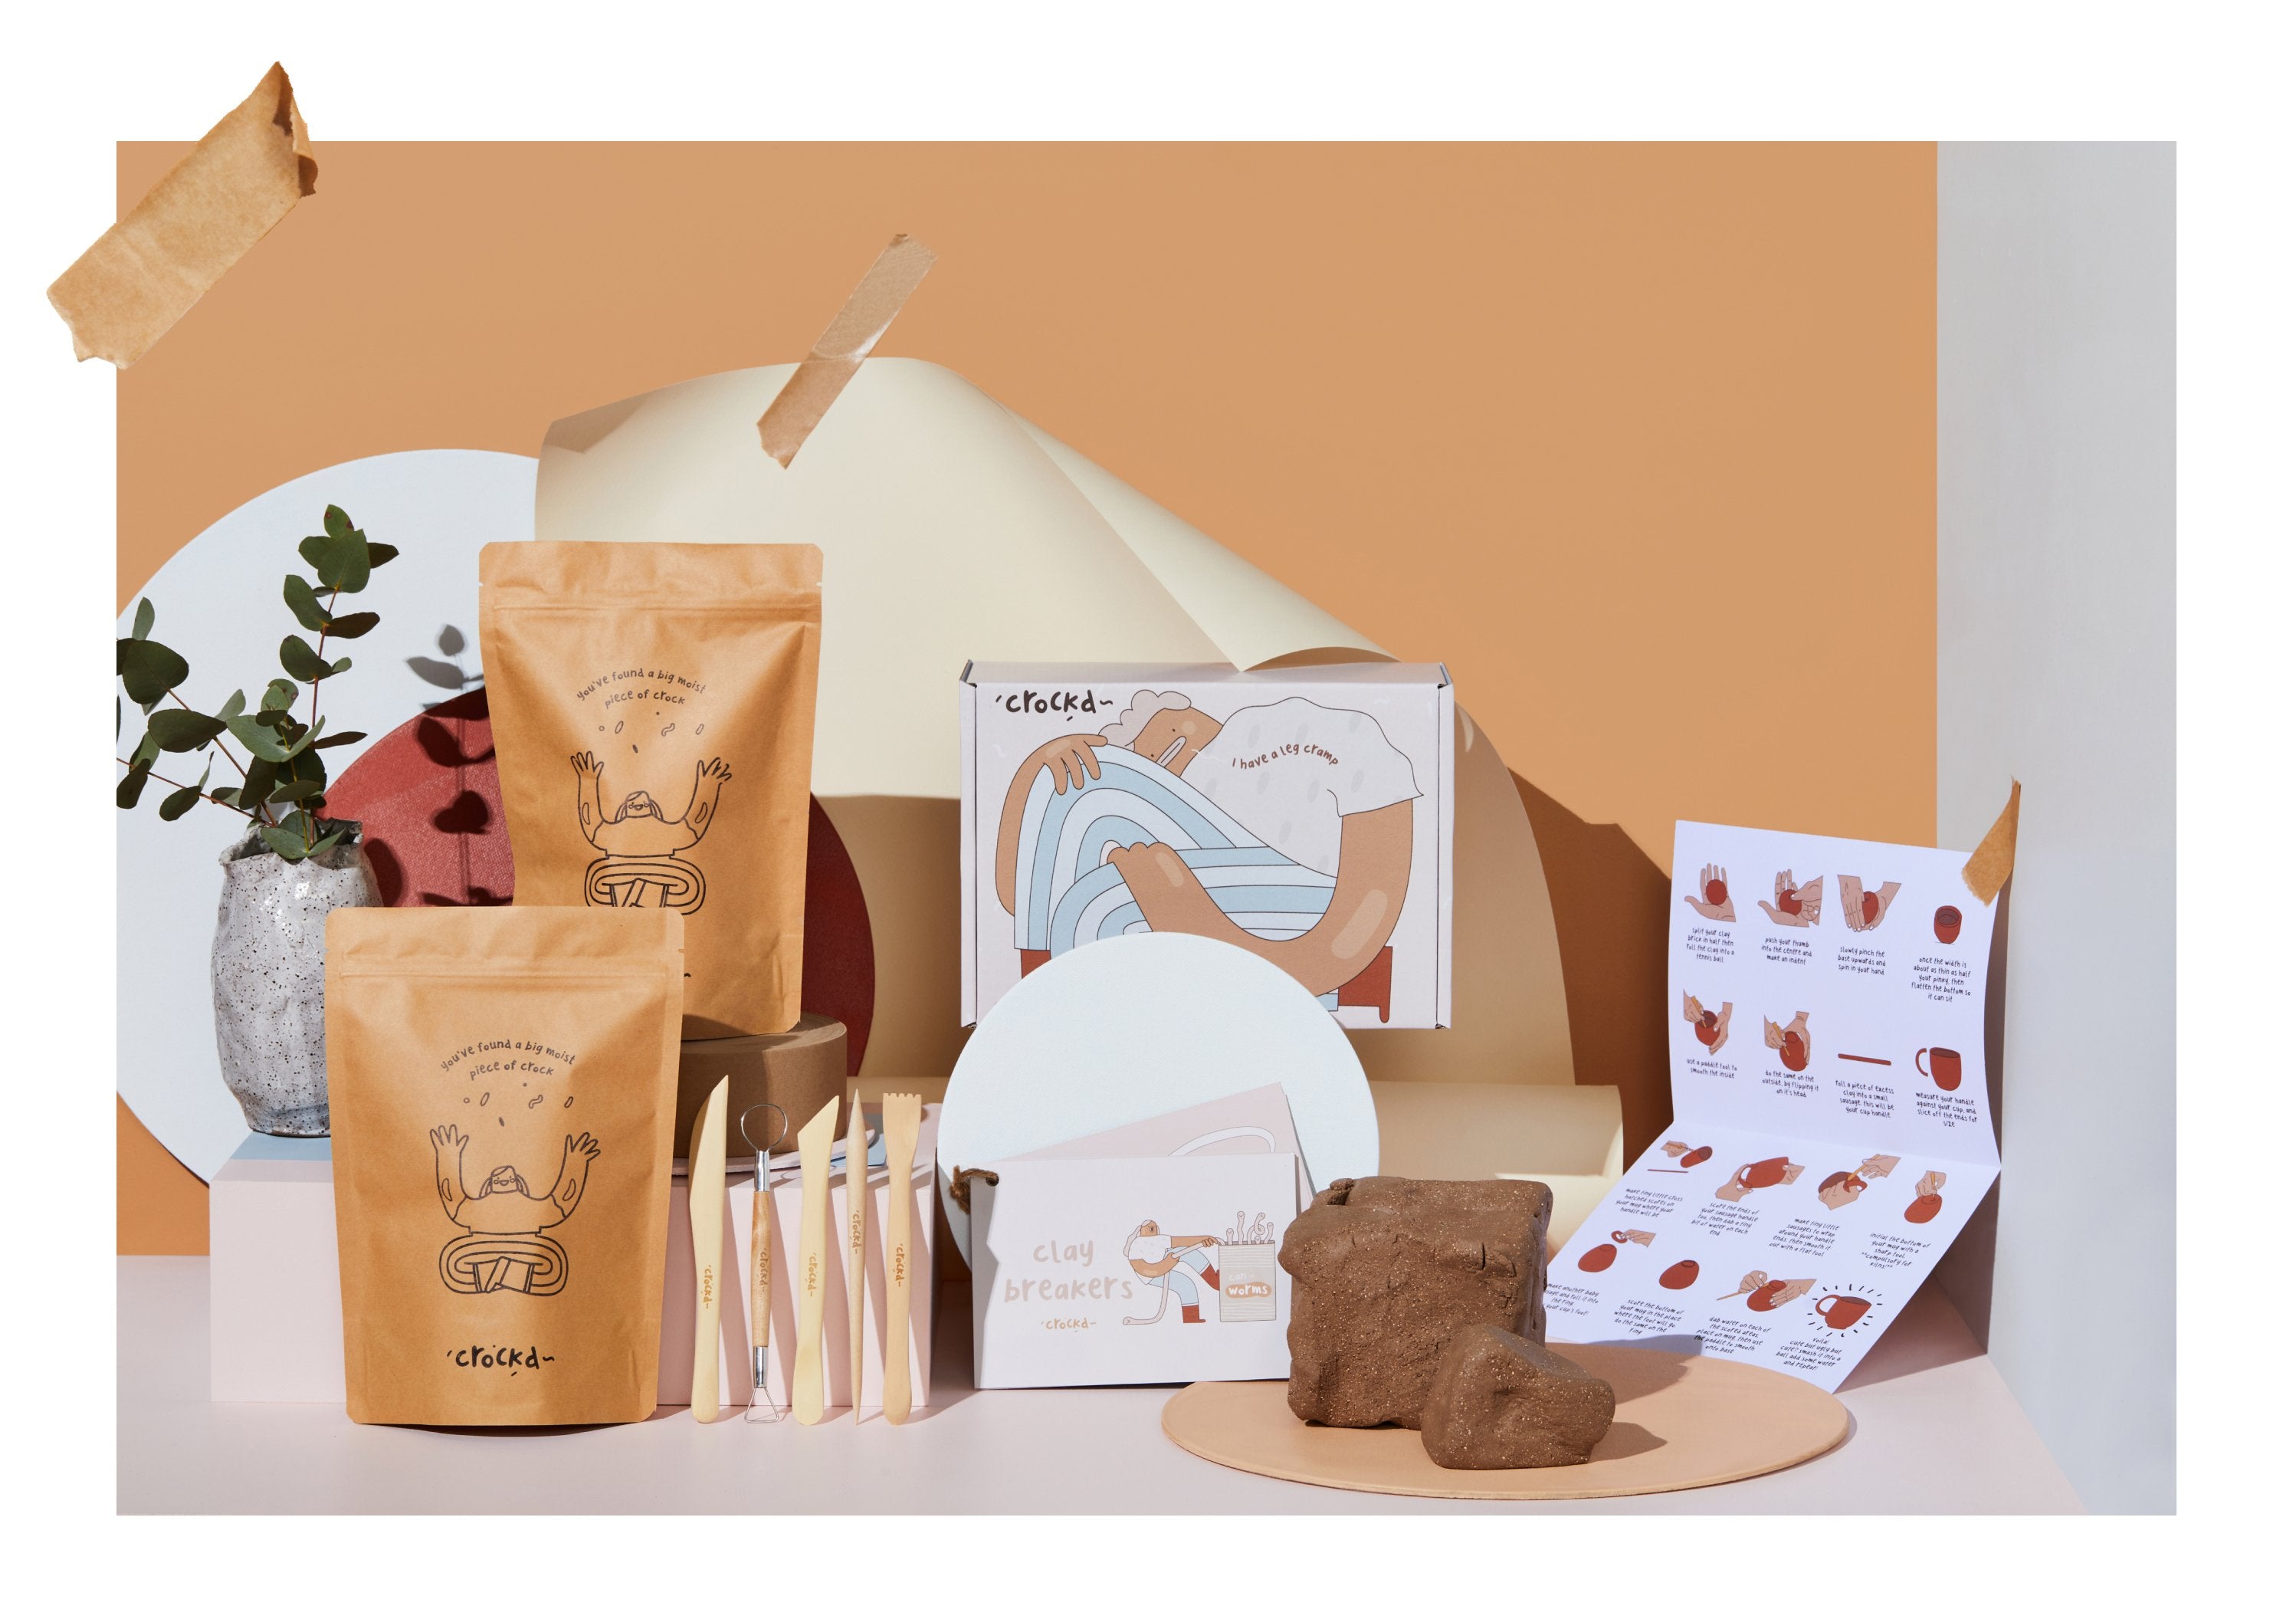 Create Your Own Clay Pottery Kit Home Pottery Craft Kit 1-2 People